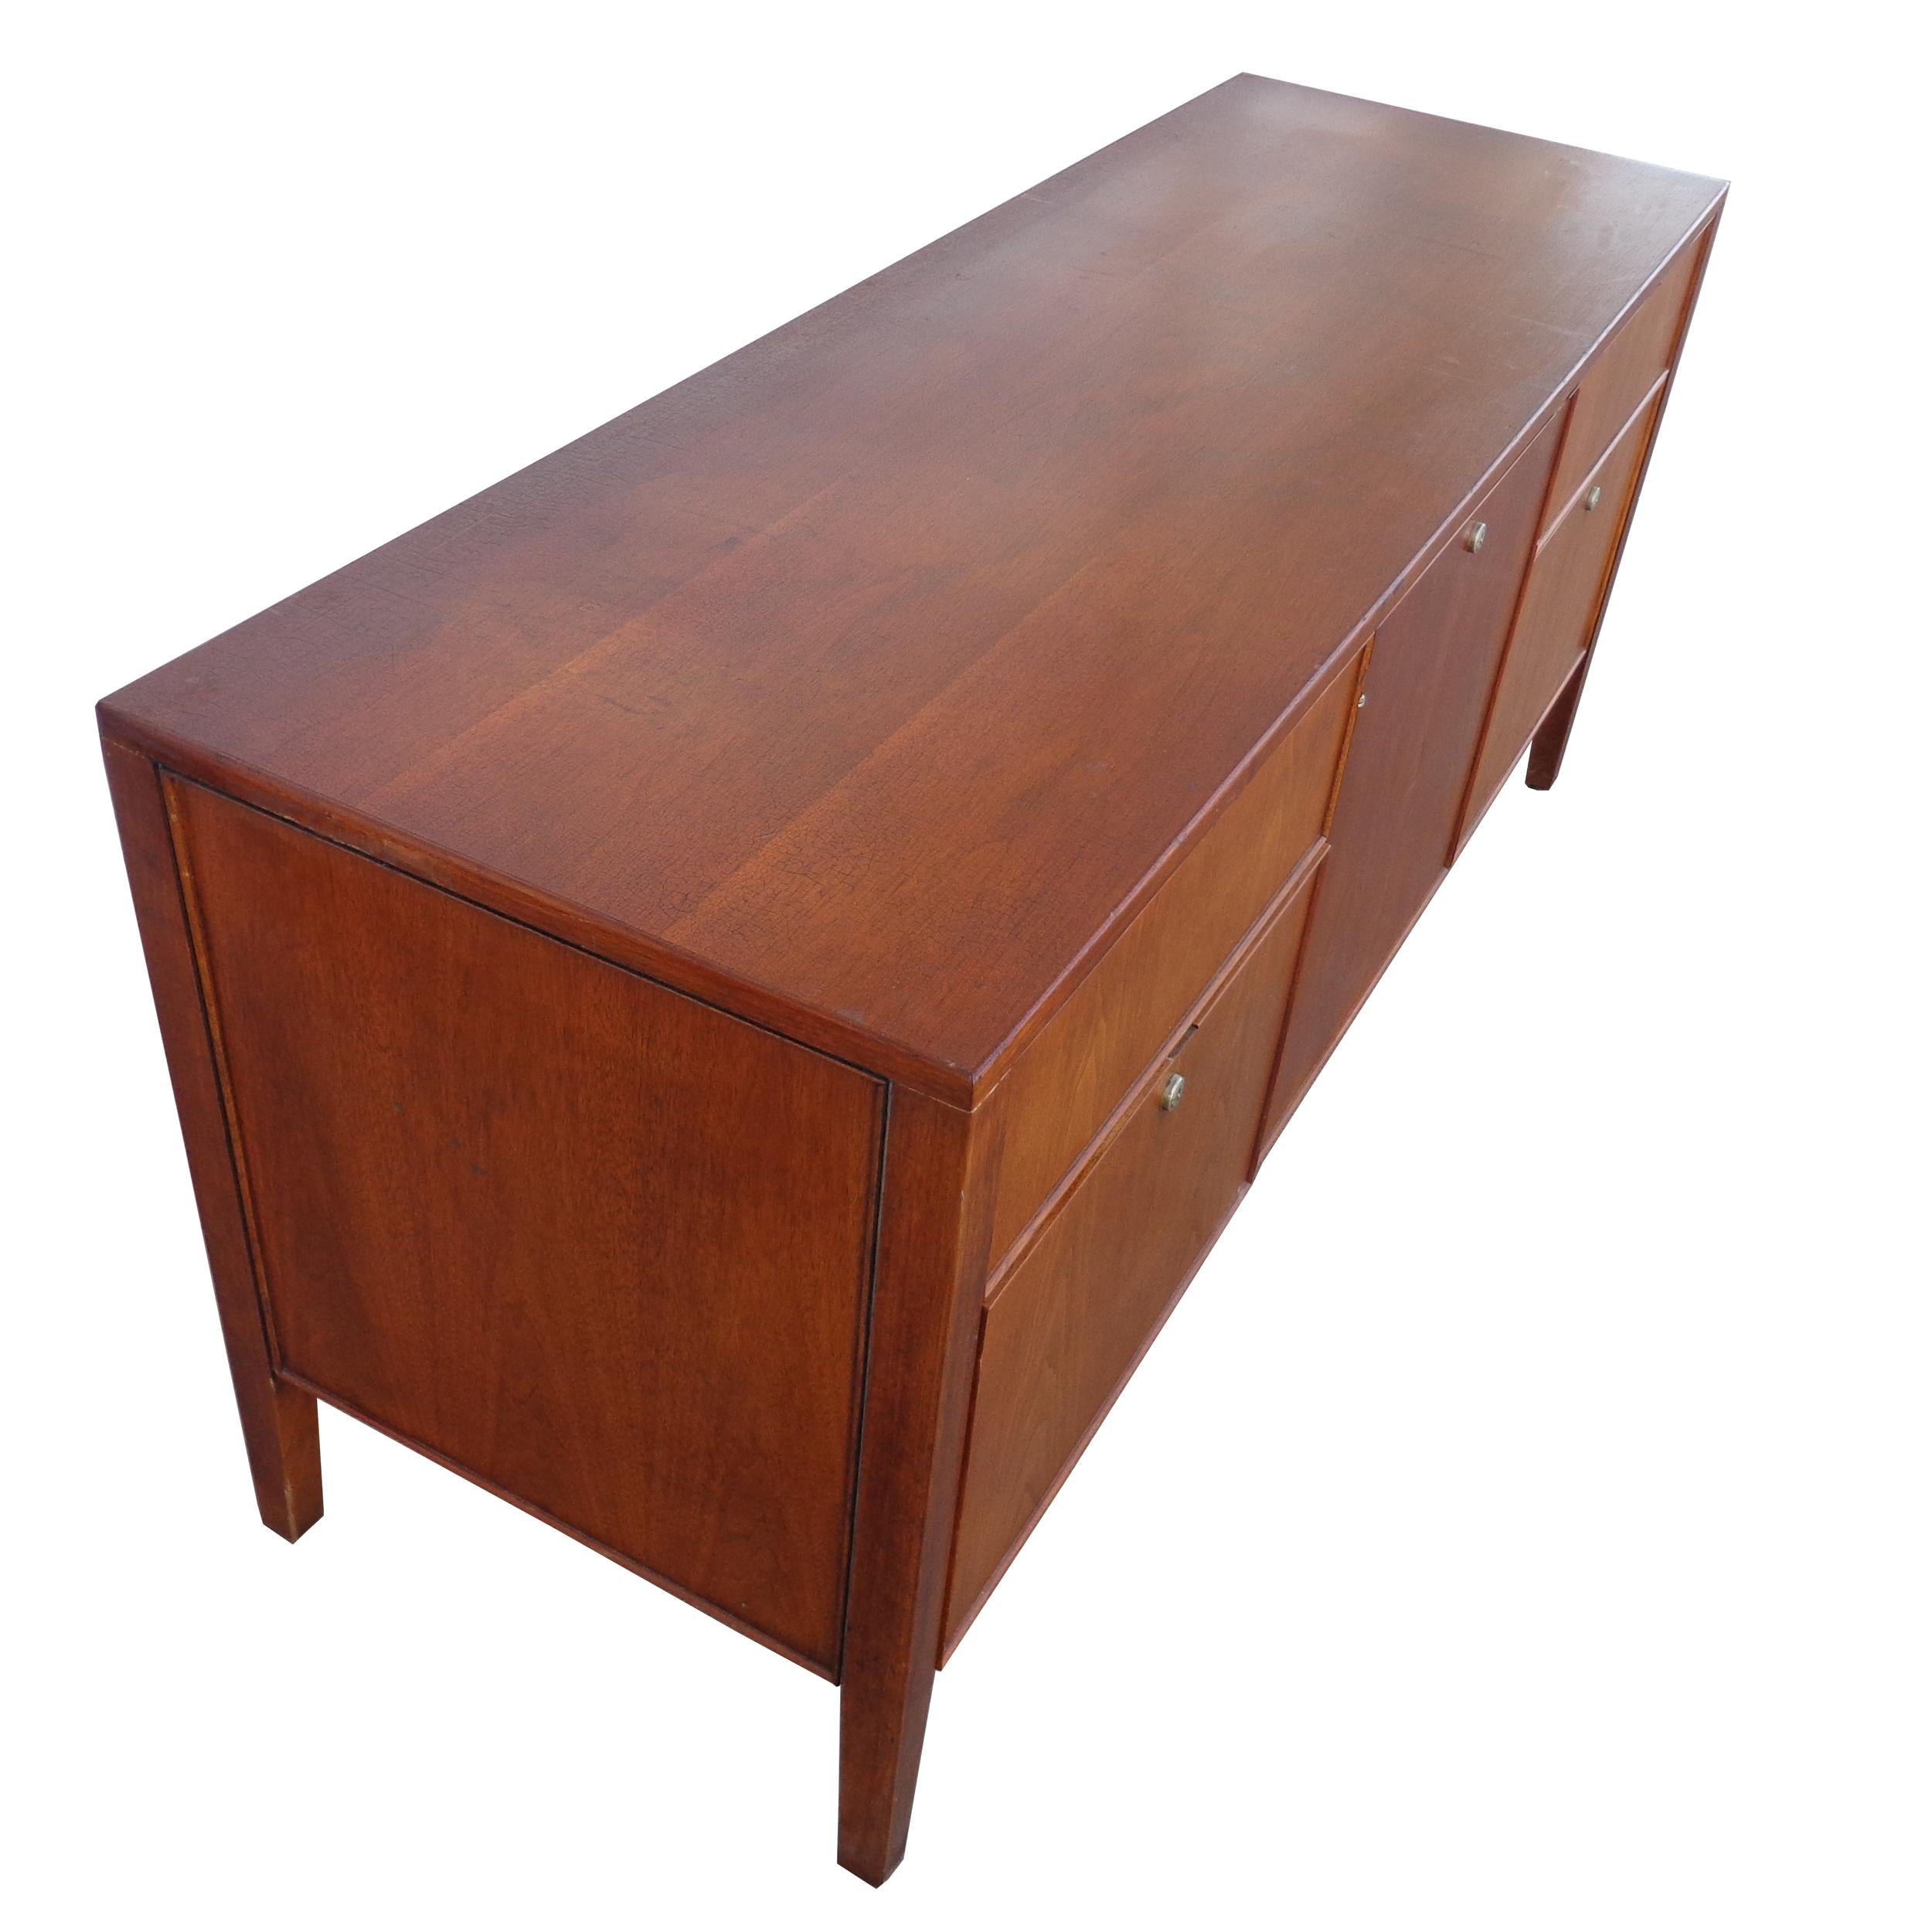 Great companion credenza to paired with a Stow Davis desk.